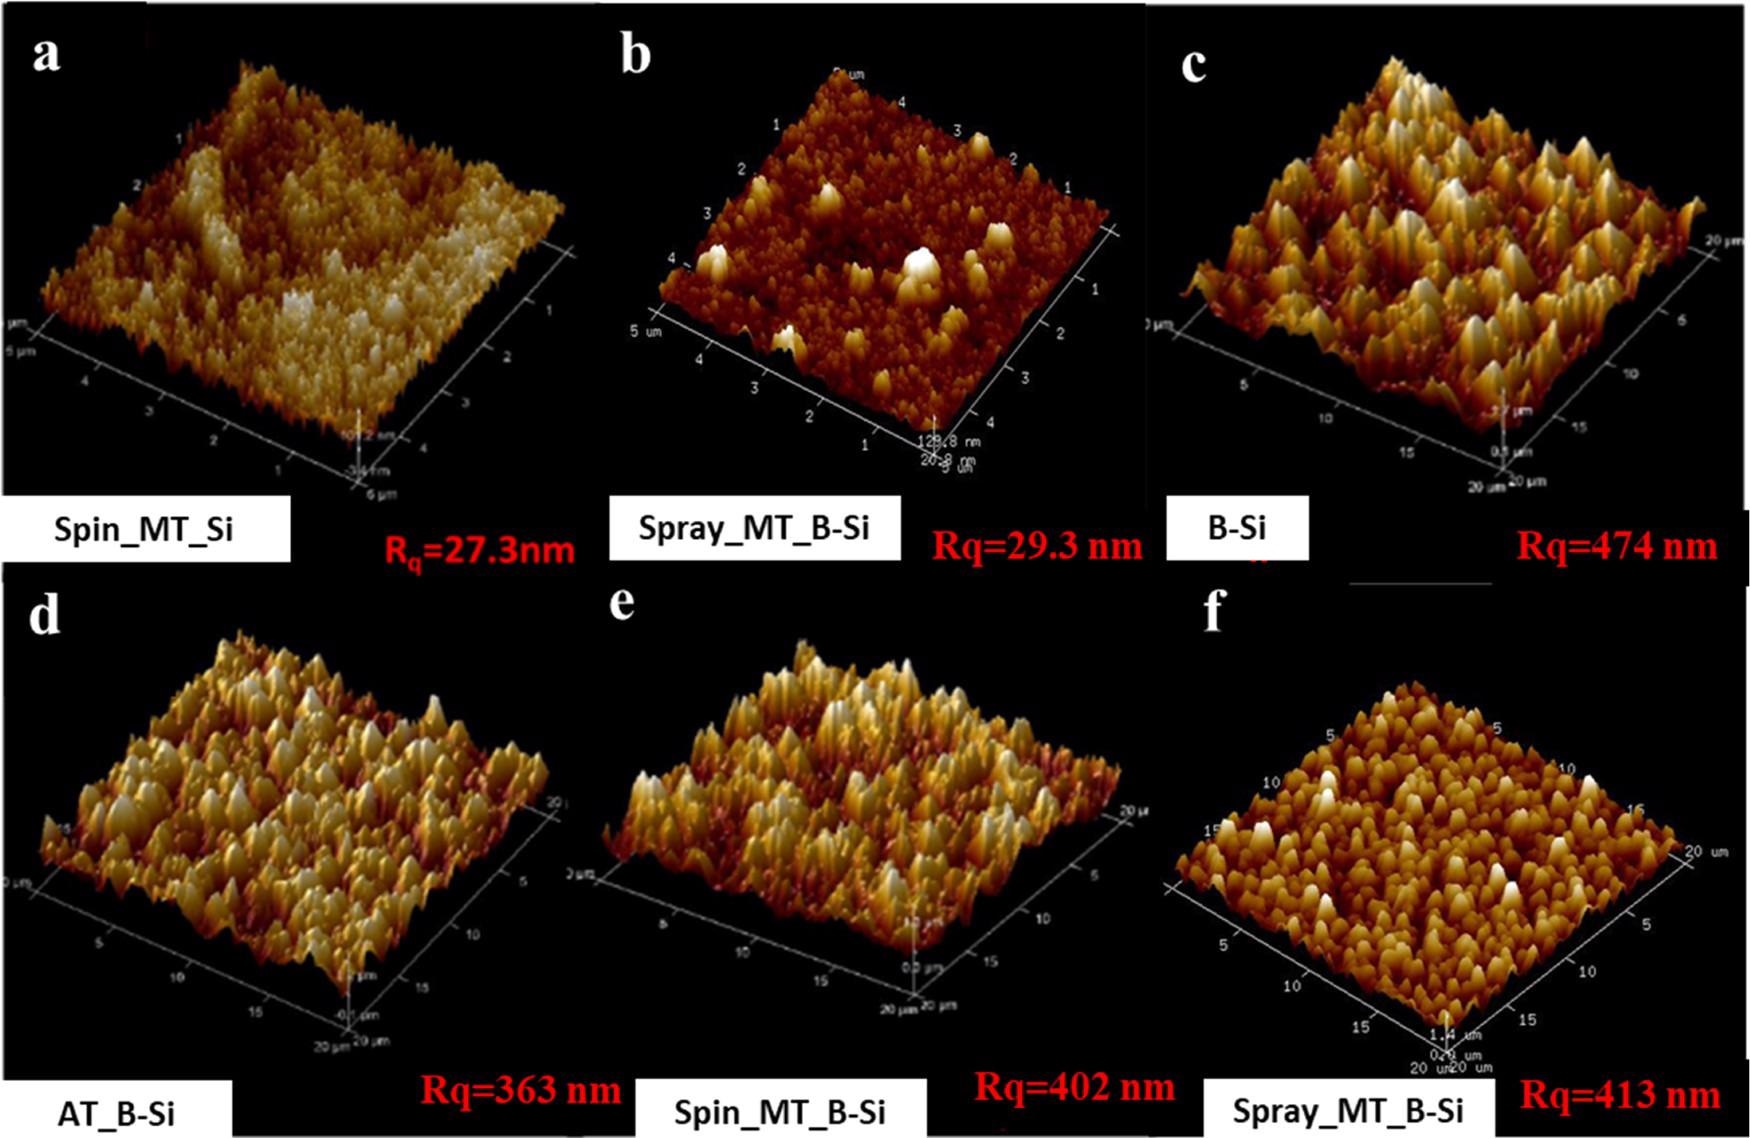 Atomic force microscopy 3D images of (a) spin-coated mesoporous TiO2, (b) spray-coated mesoporous TiO2, (c) black silicon, (d) ALD-deposited TiO2 on black silicon, (e) mesoporous TiO2 spin-coated on black Si, and (f) mesoporous TiO2 spray-coated on black Si. The surface roughness is highest in B-Si. It reduces on TiO2-coated surfaces. The Rq value indicates the root mean square roughness of surfaces.